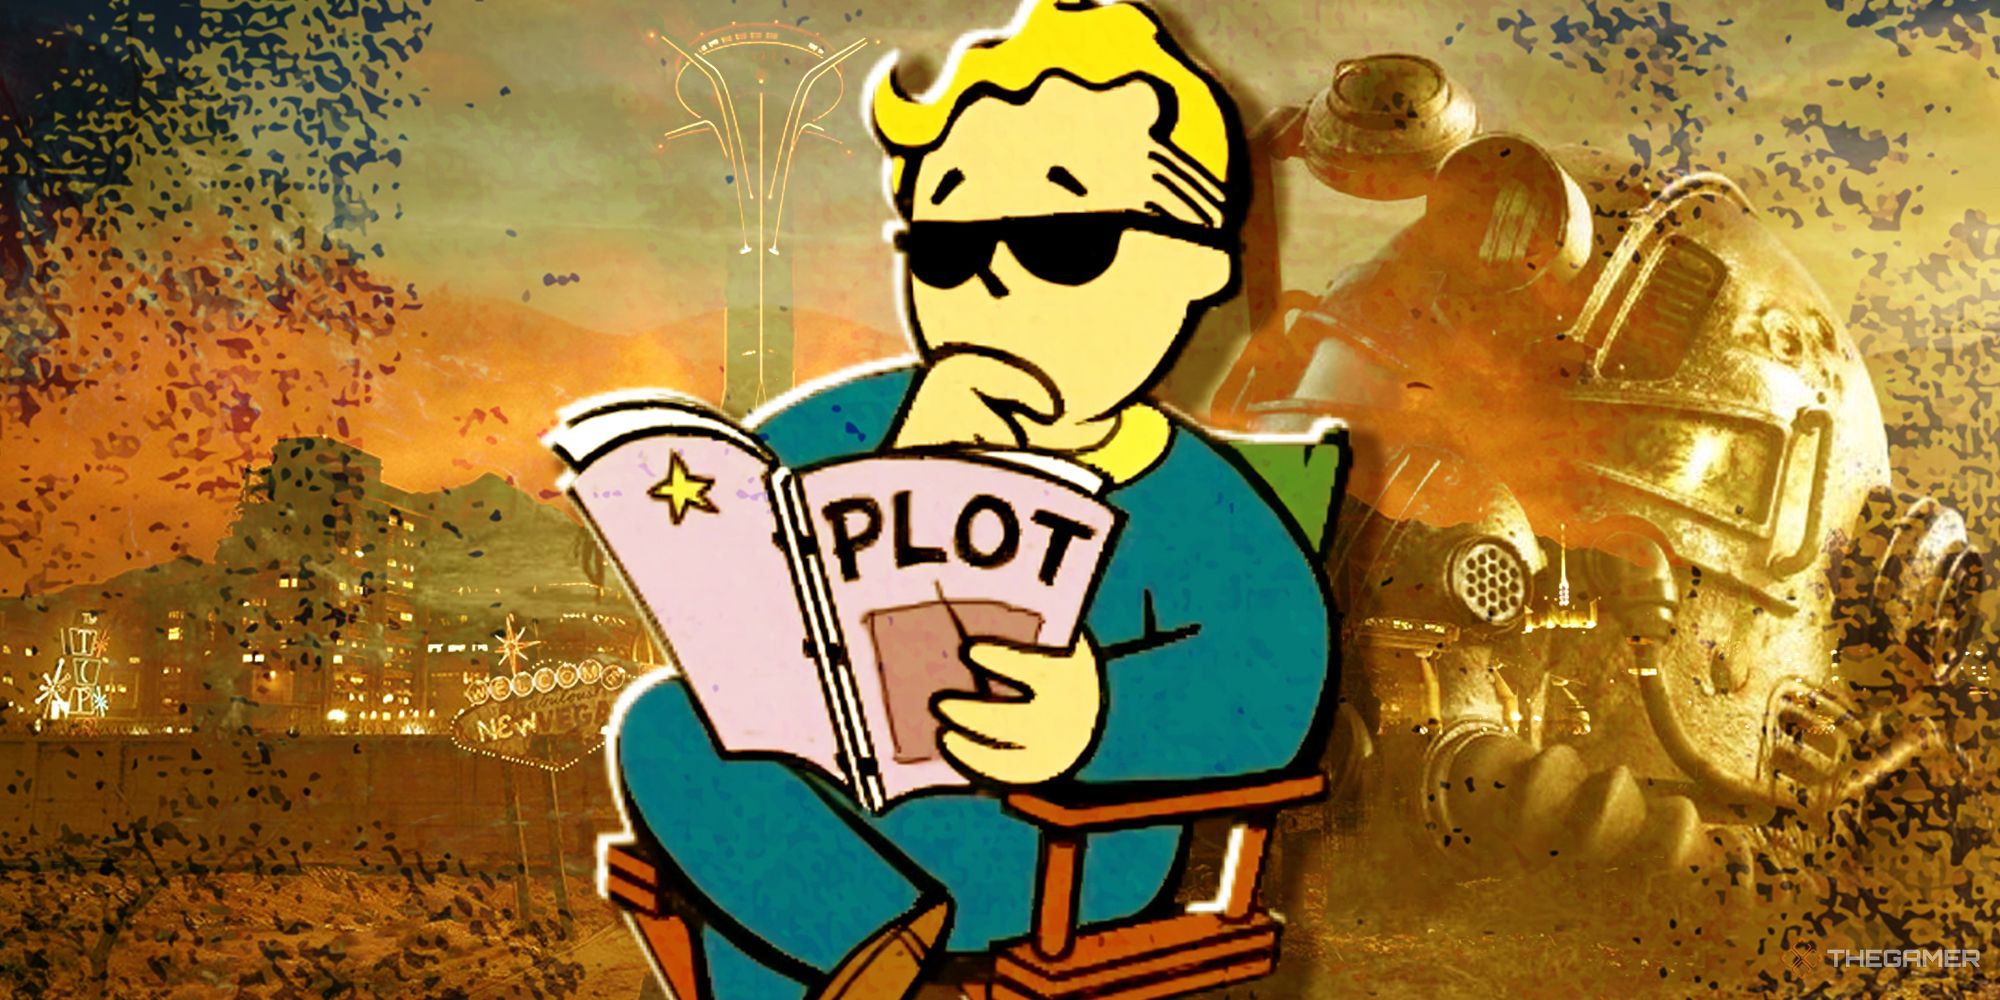 Vault Boy wearing sunglasses and sitting in a chair, reading a pink book that says plot. The background shows a city in the wasteland.